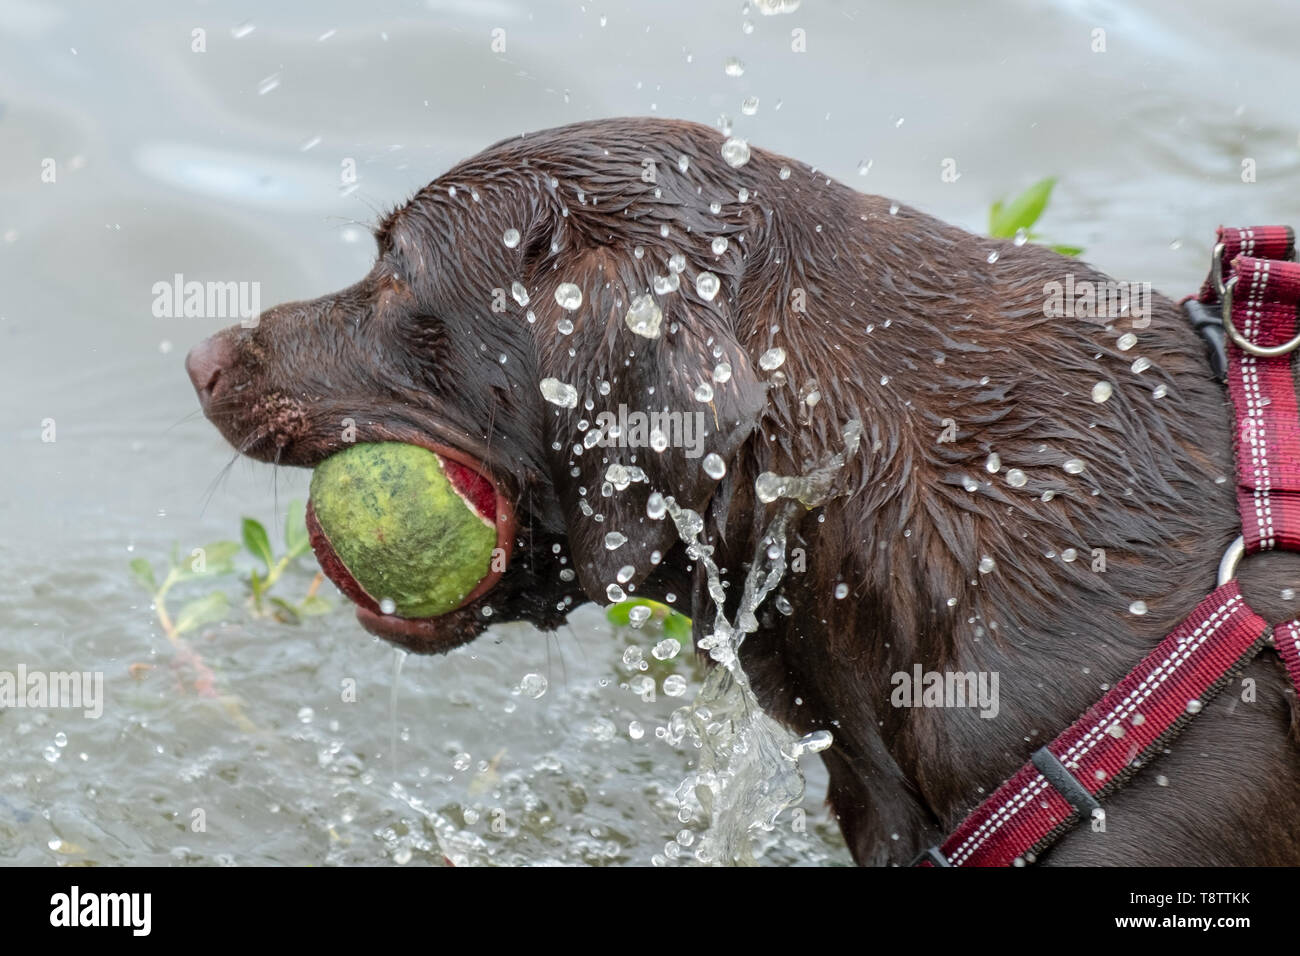 A young chocolate lab loves to splash and play fetch with her ball in the pond. Stock Photo